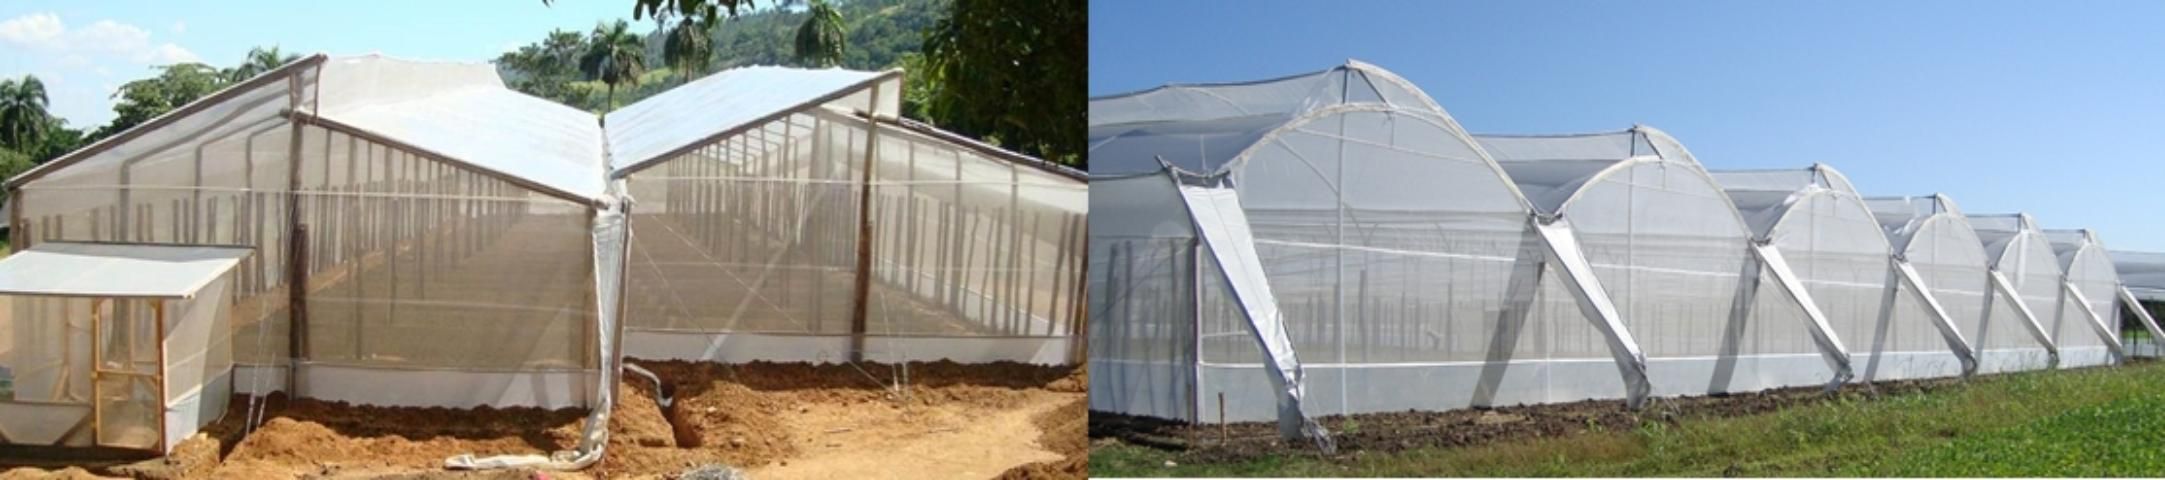 Figure 3. Multi-chapel (left) and semi-cylindrical (right) greenhouse units with passive ventilation on roofs.